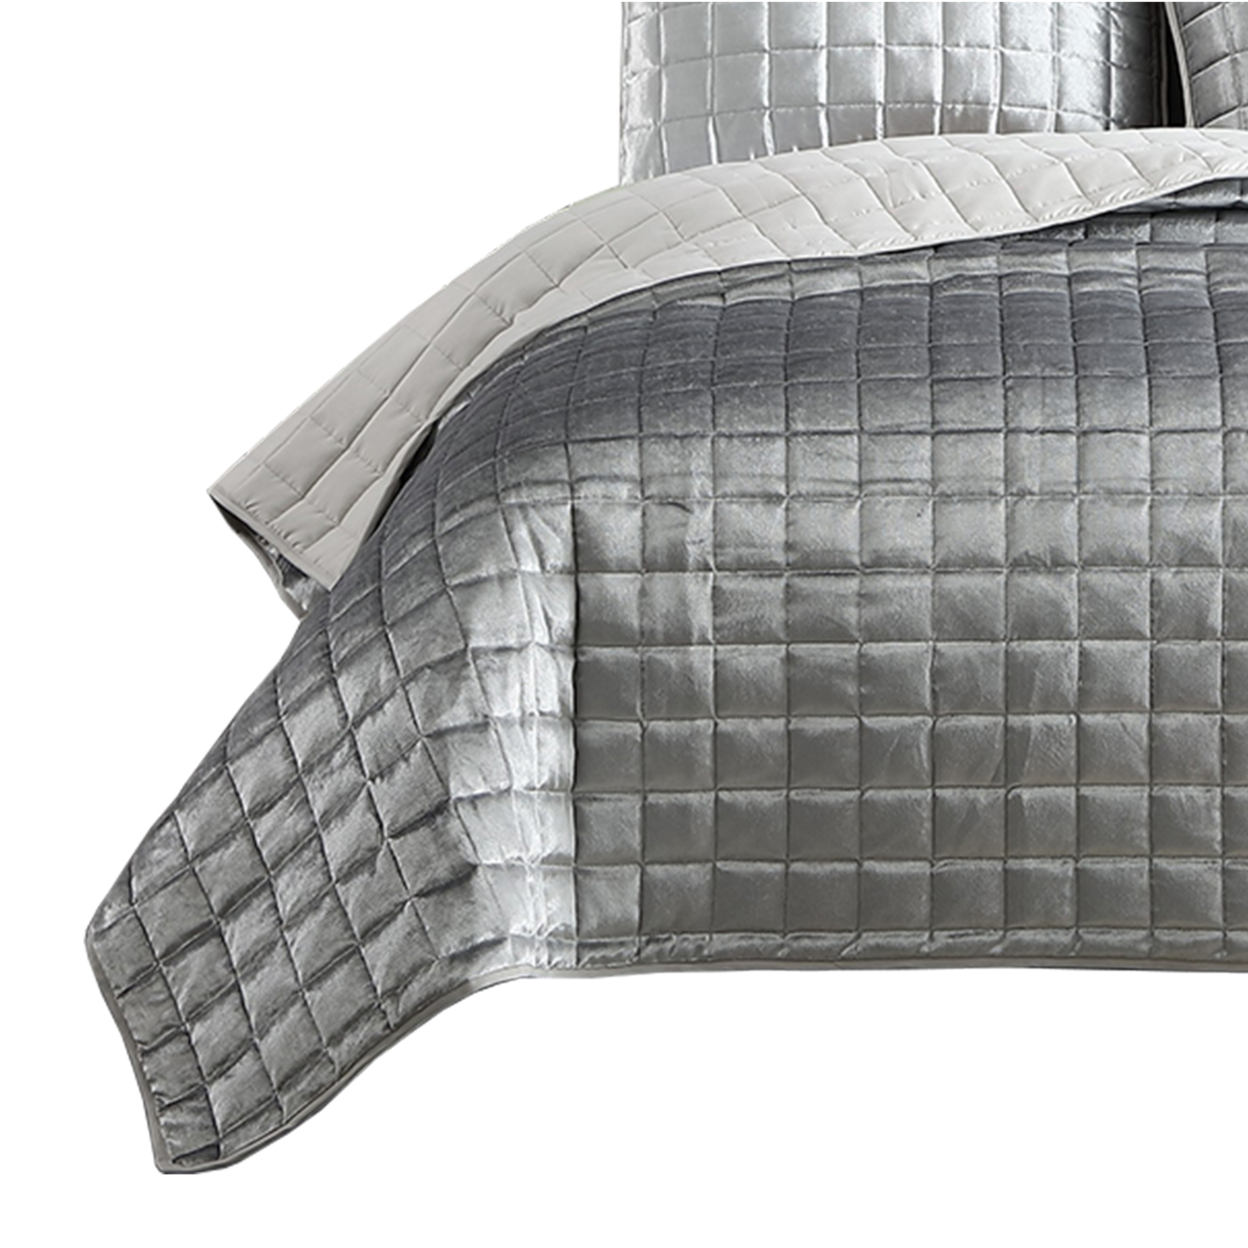 3 Piece Queen Size Coverlet Set With Stitched Square Pattern, Silver- Saltoro Sherpi